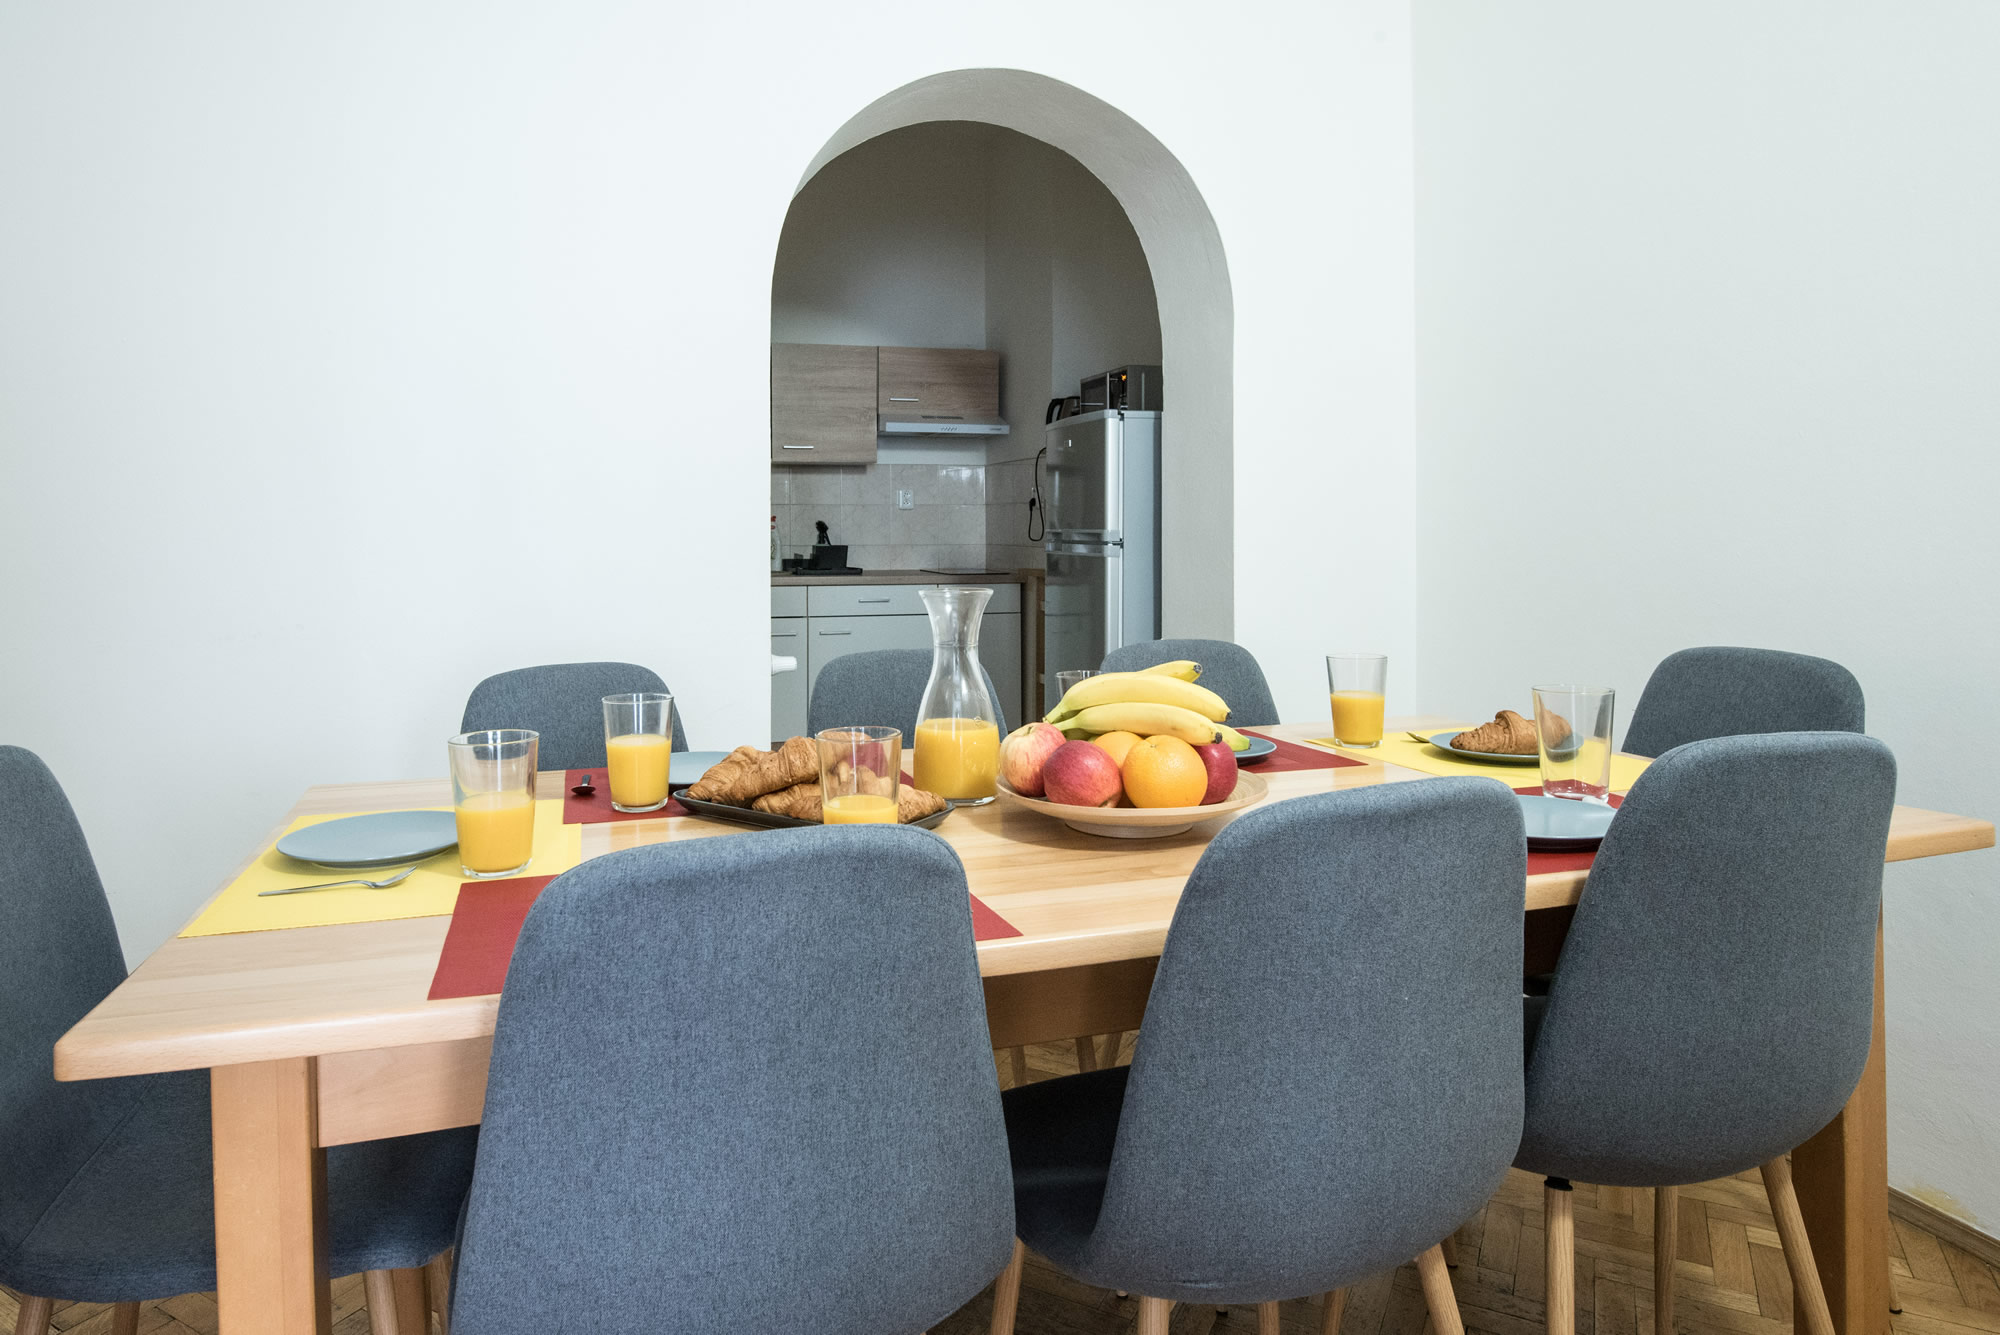 Dining table with fruit, juice and croissant. Grey chairs are around. There is a kitchen behind.